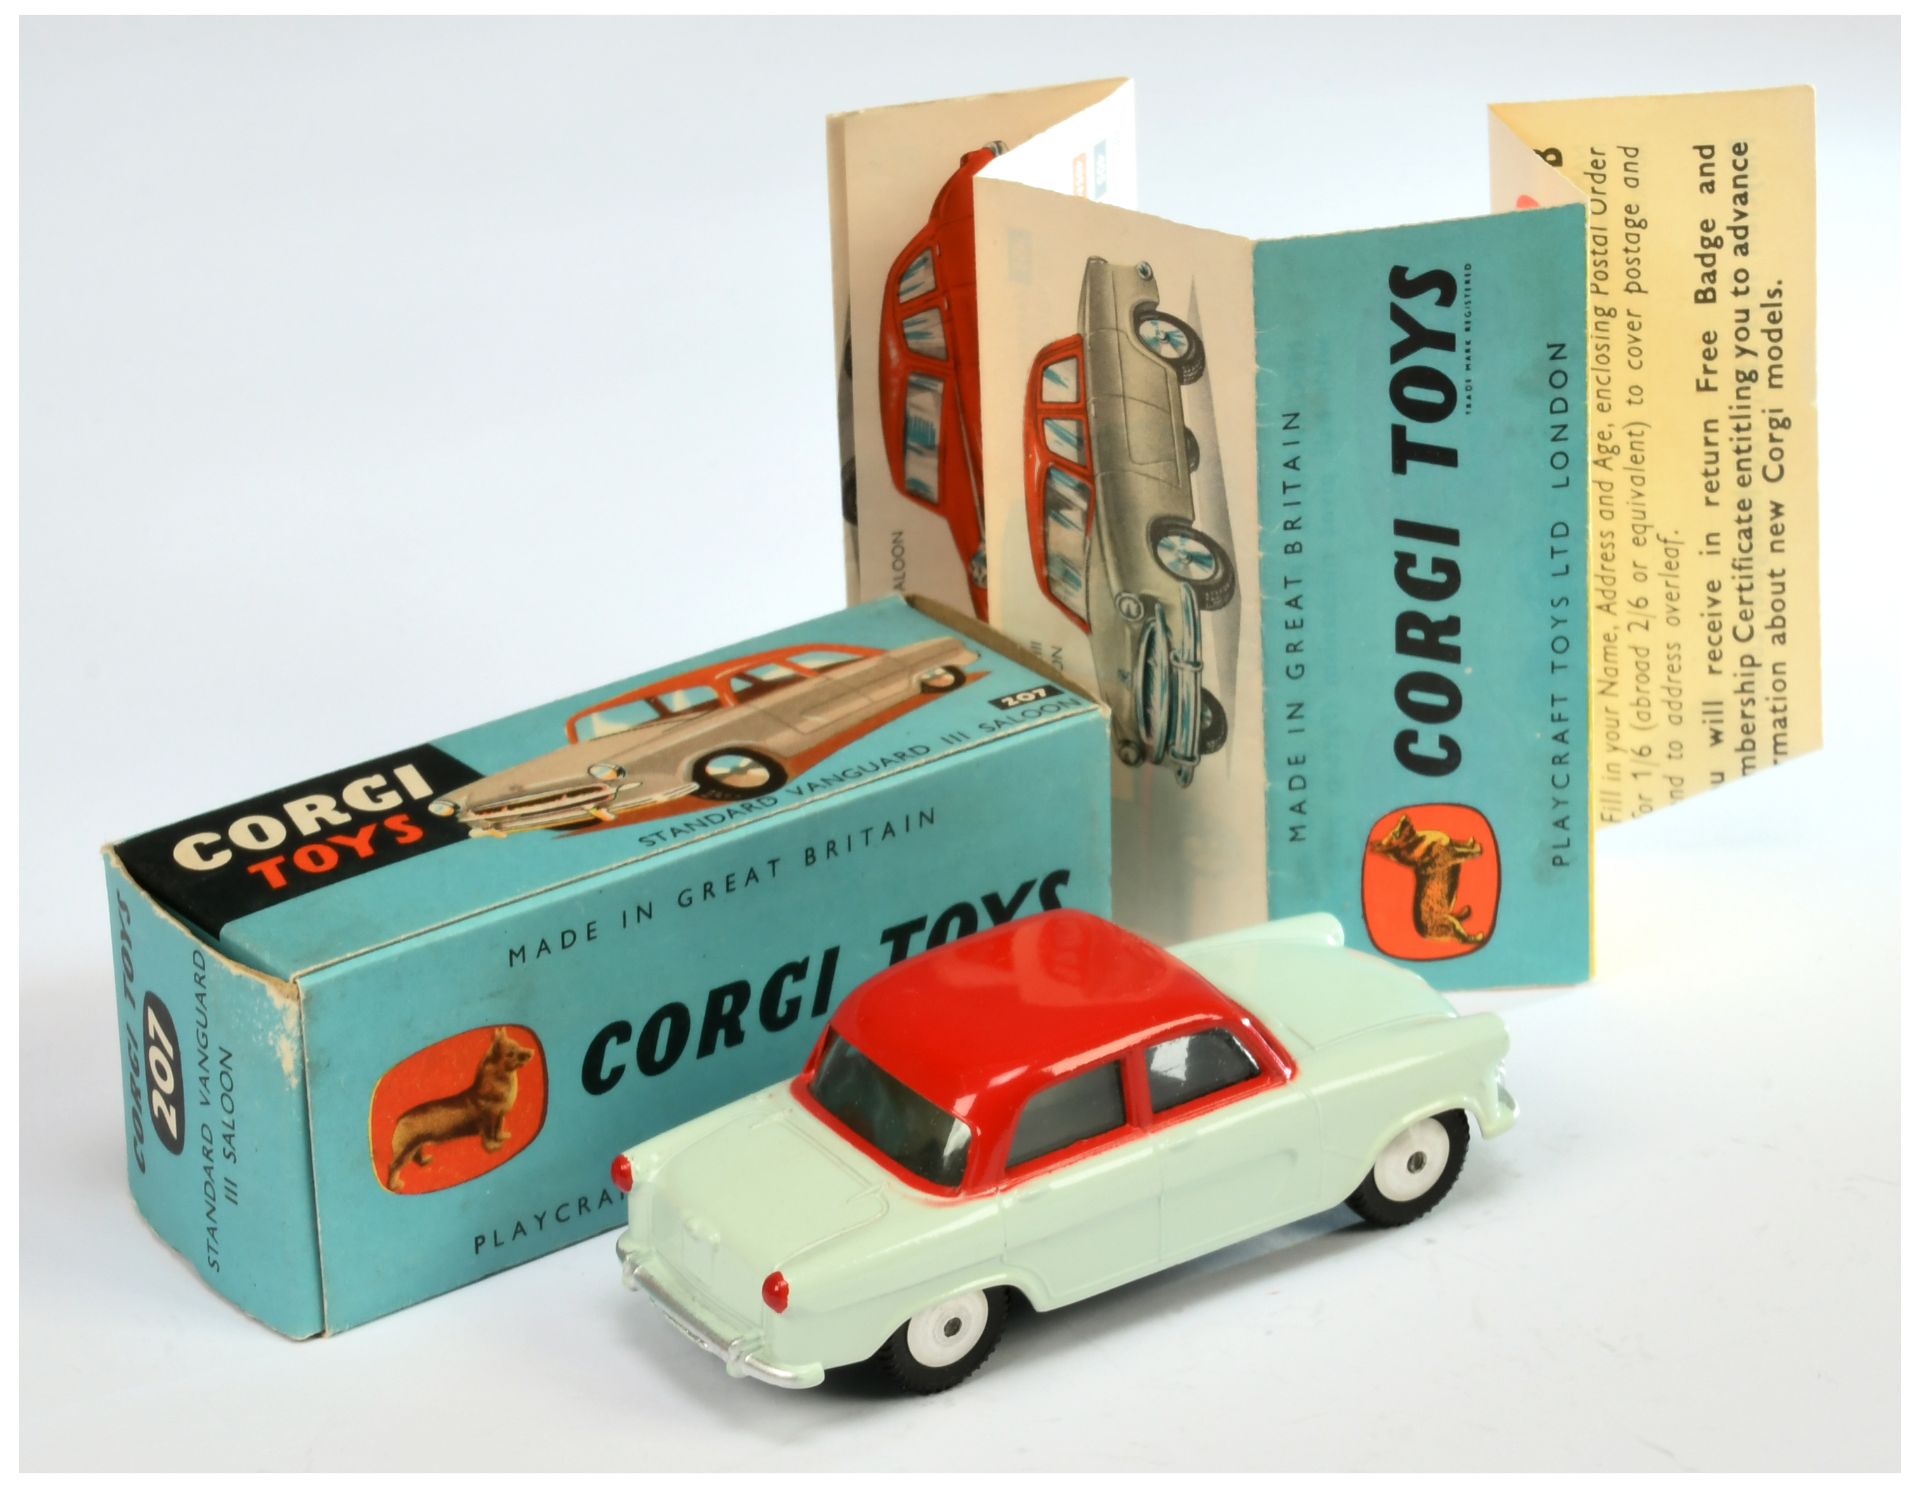 Corgi Toys 207 Standard Vanguard Saloon - Two-Tone - Very pale green with red upper, silver trim ... - Image 2 of 2